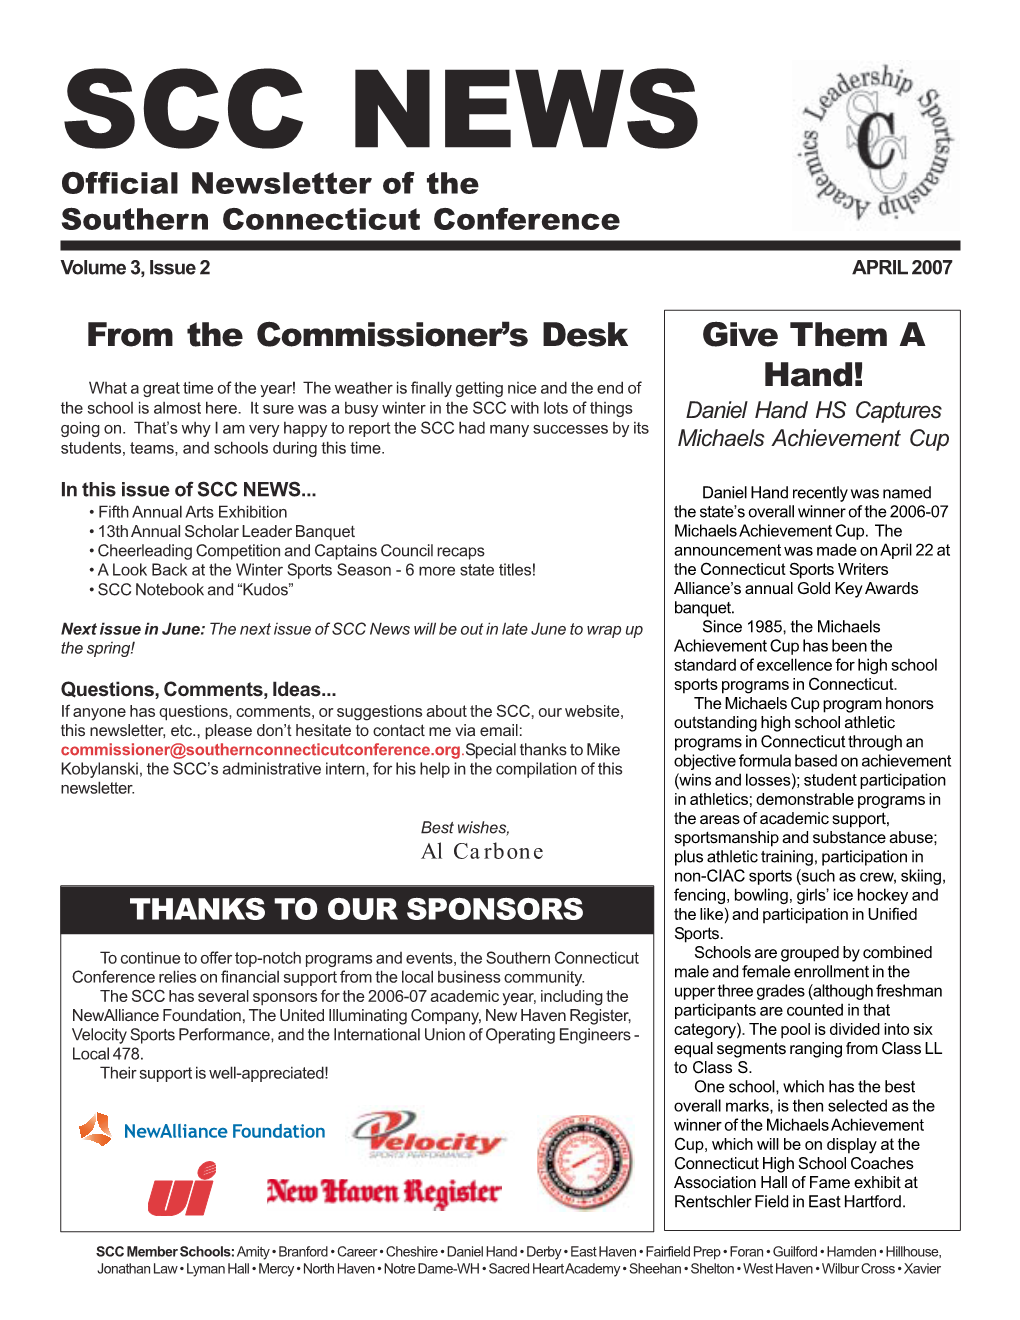 SCC NEWS Official Newsletter of the Southern Connecticut Conference Volume 3, Issue 2 APRIL 2007